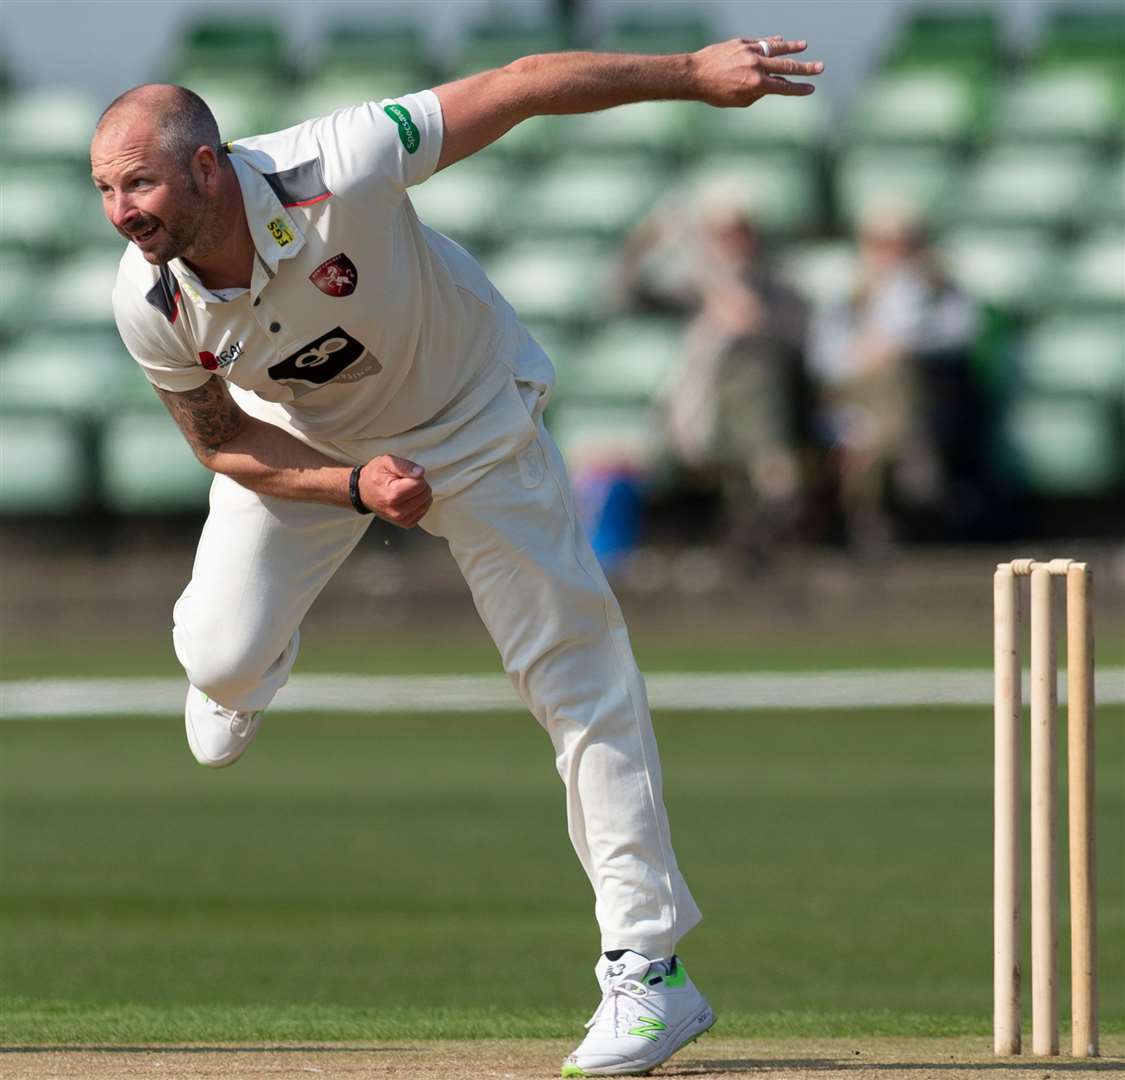 Kent's Darren Stevens bowls against Loughborough University at Canterbury this week Picture: Ady Kerry